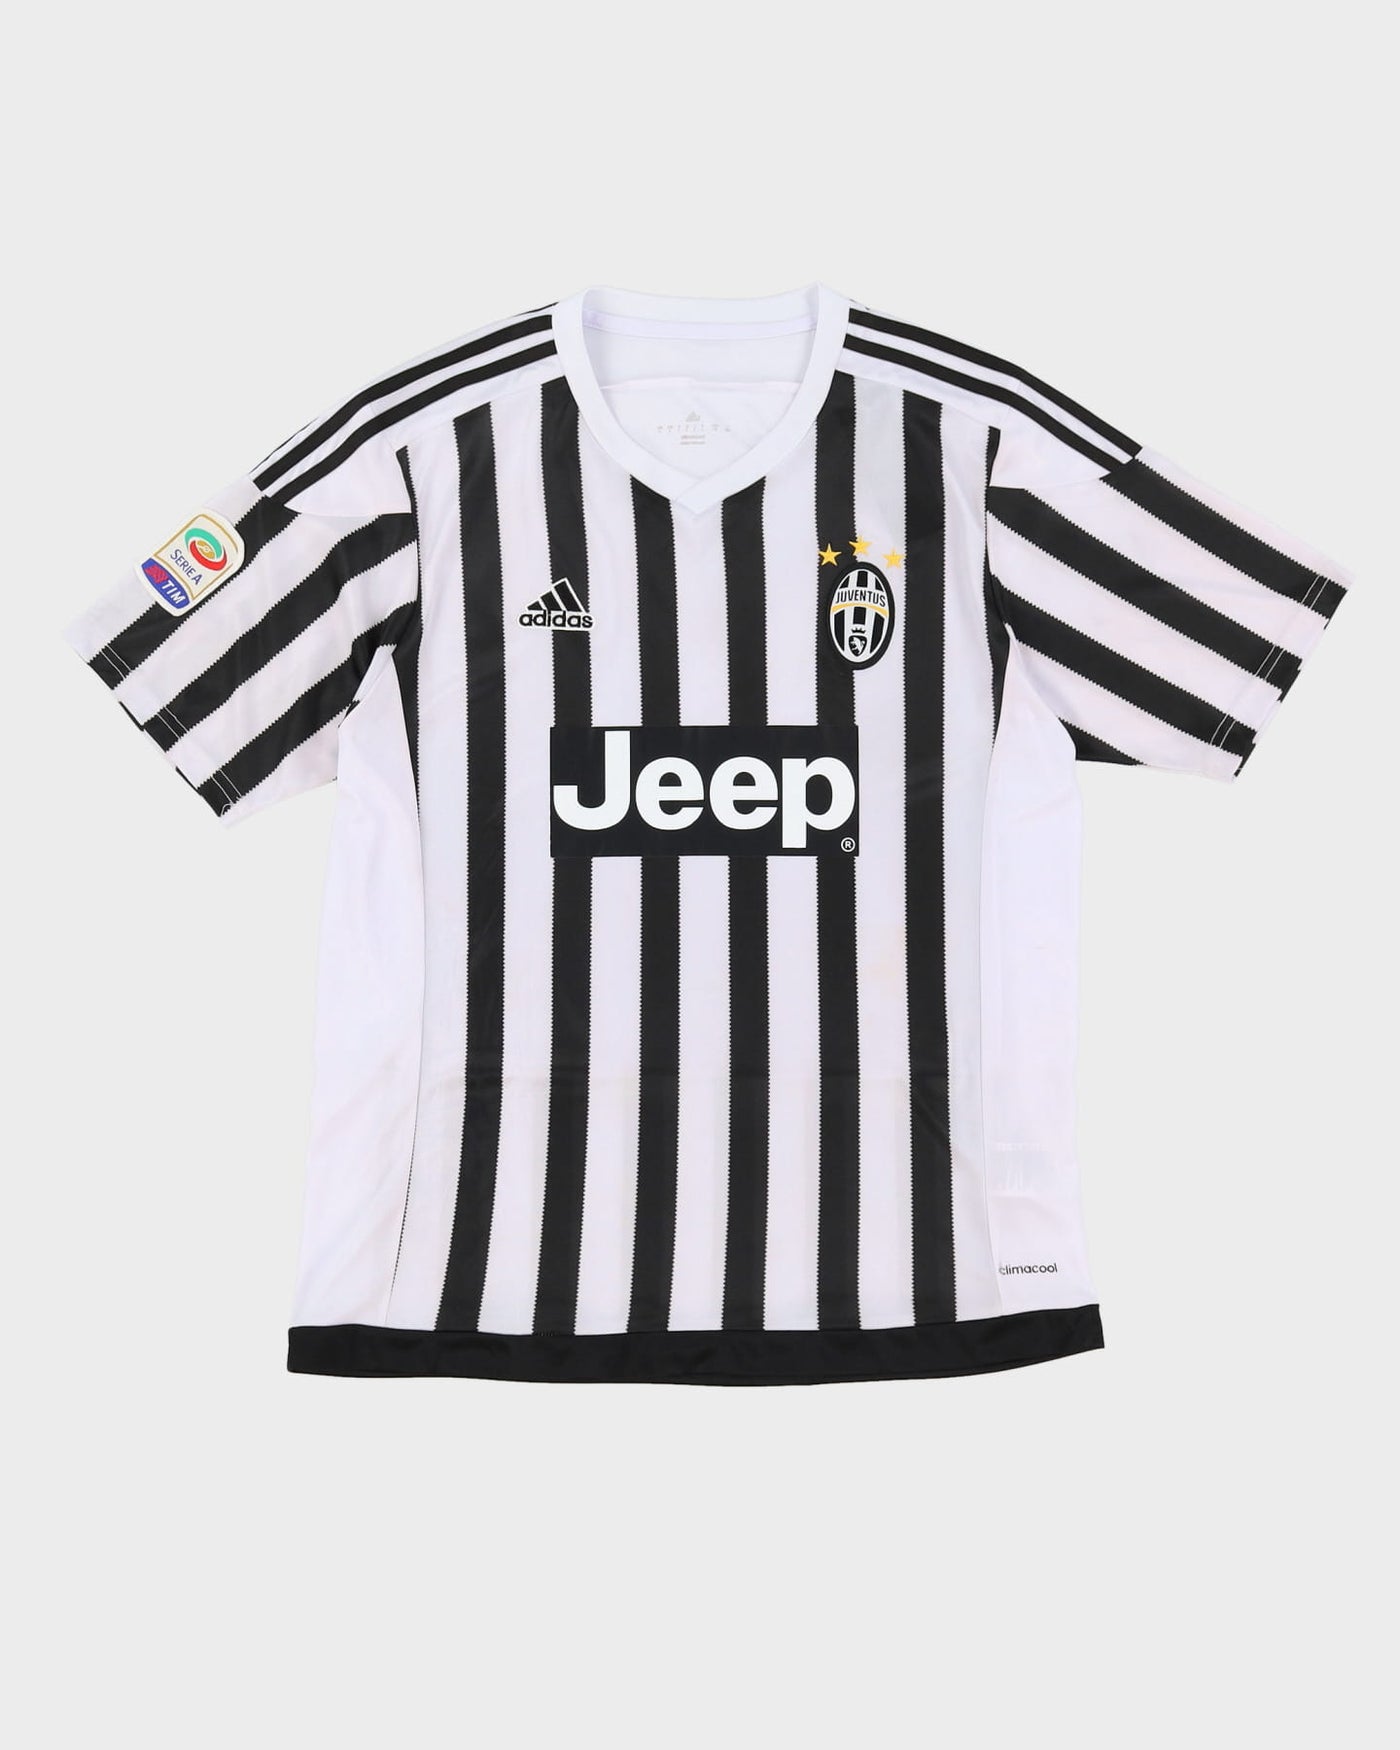 New With Tags 2018-19 Juventus Home Football Shirt / Jersey - L